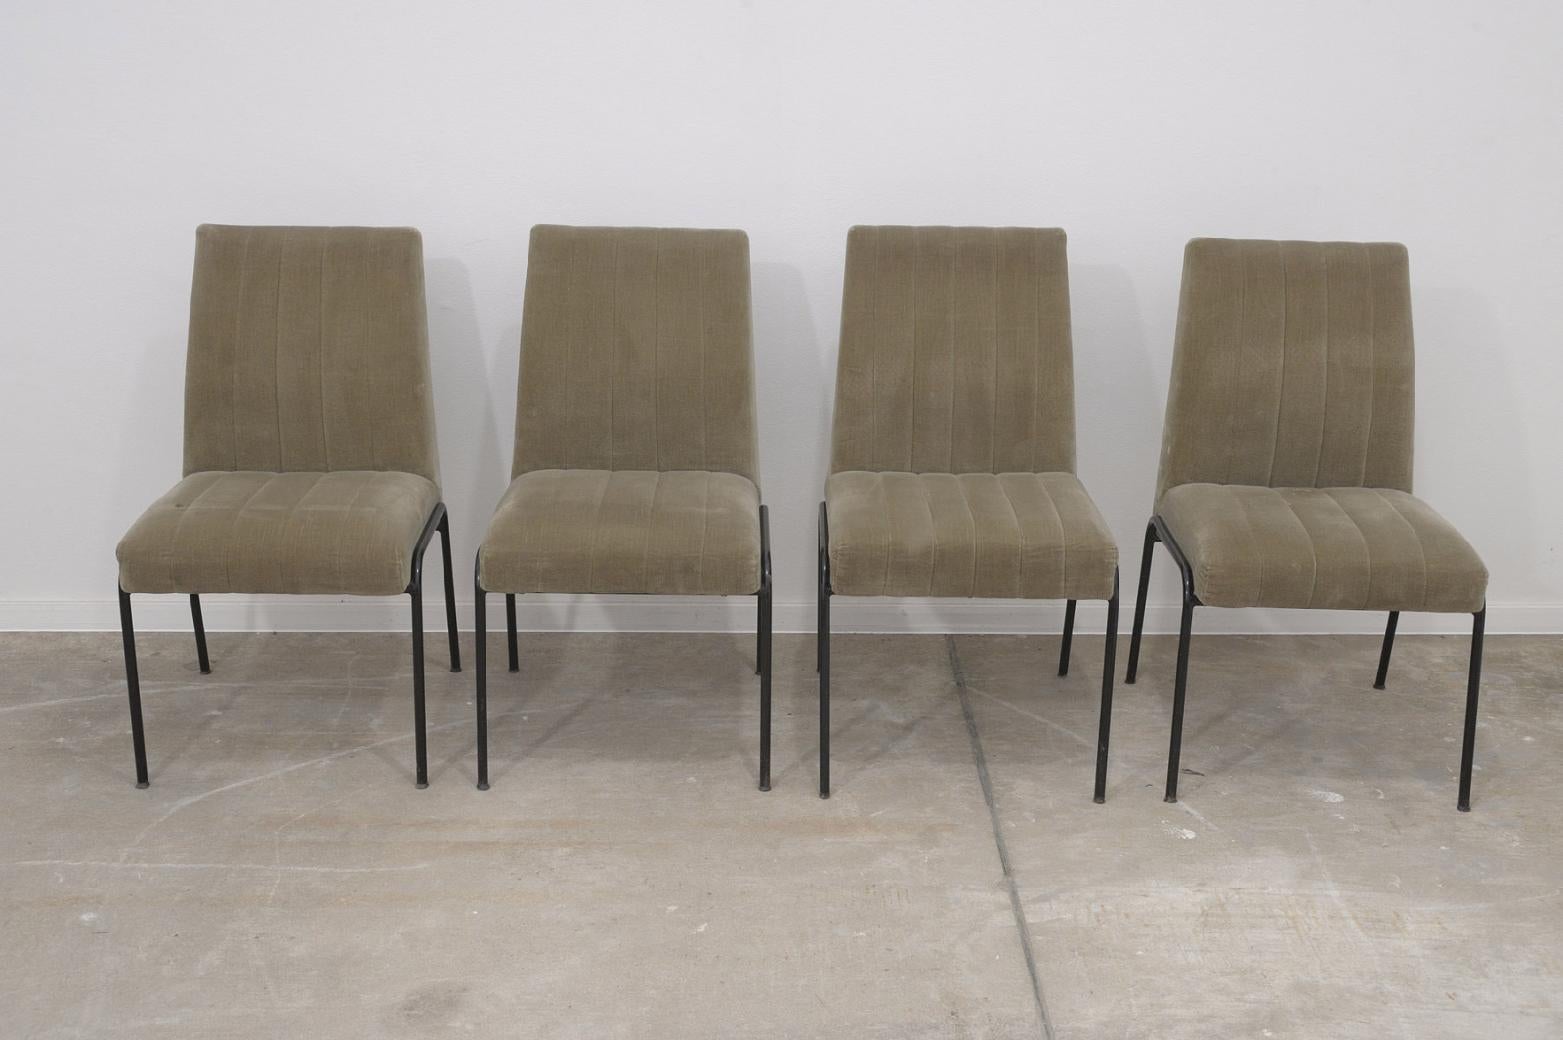 Set of four upholstered chairs from the 1960s. Interestingly curved seat backs. The chairs reminds works of Piere Guariche. Upholstery in good Vintage condition. Metal construction. Chairs bears some signs of use and age.

Price is for the set of